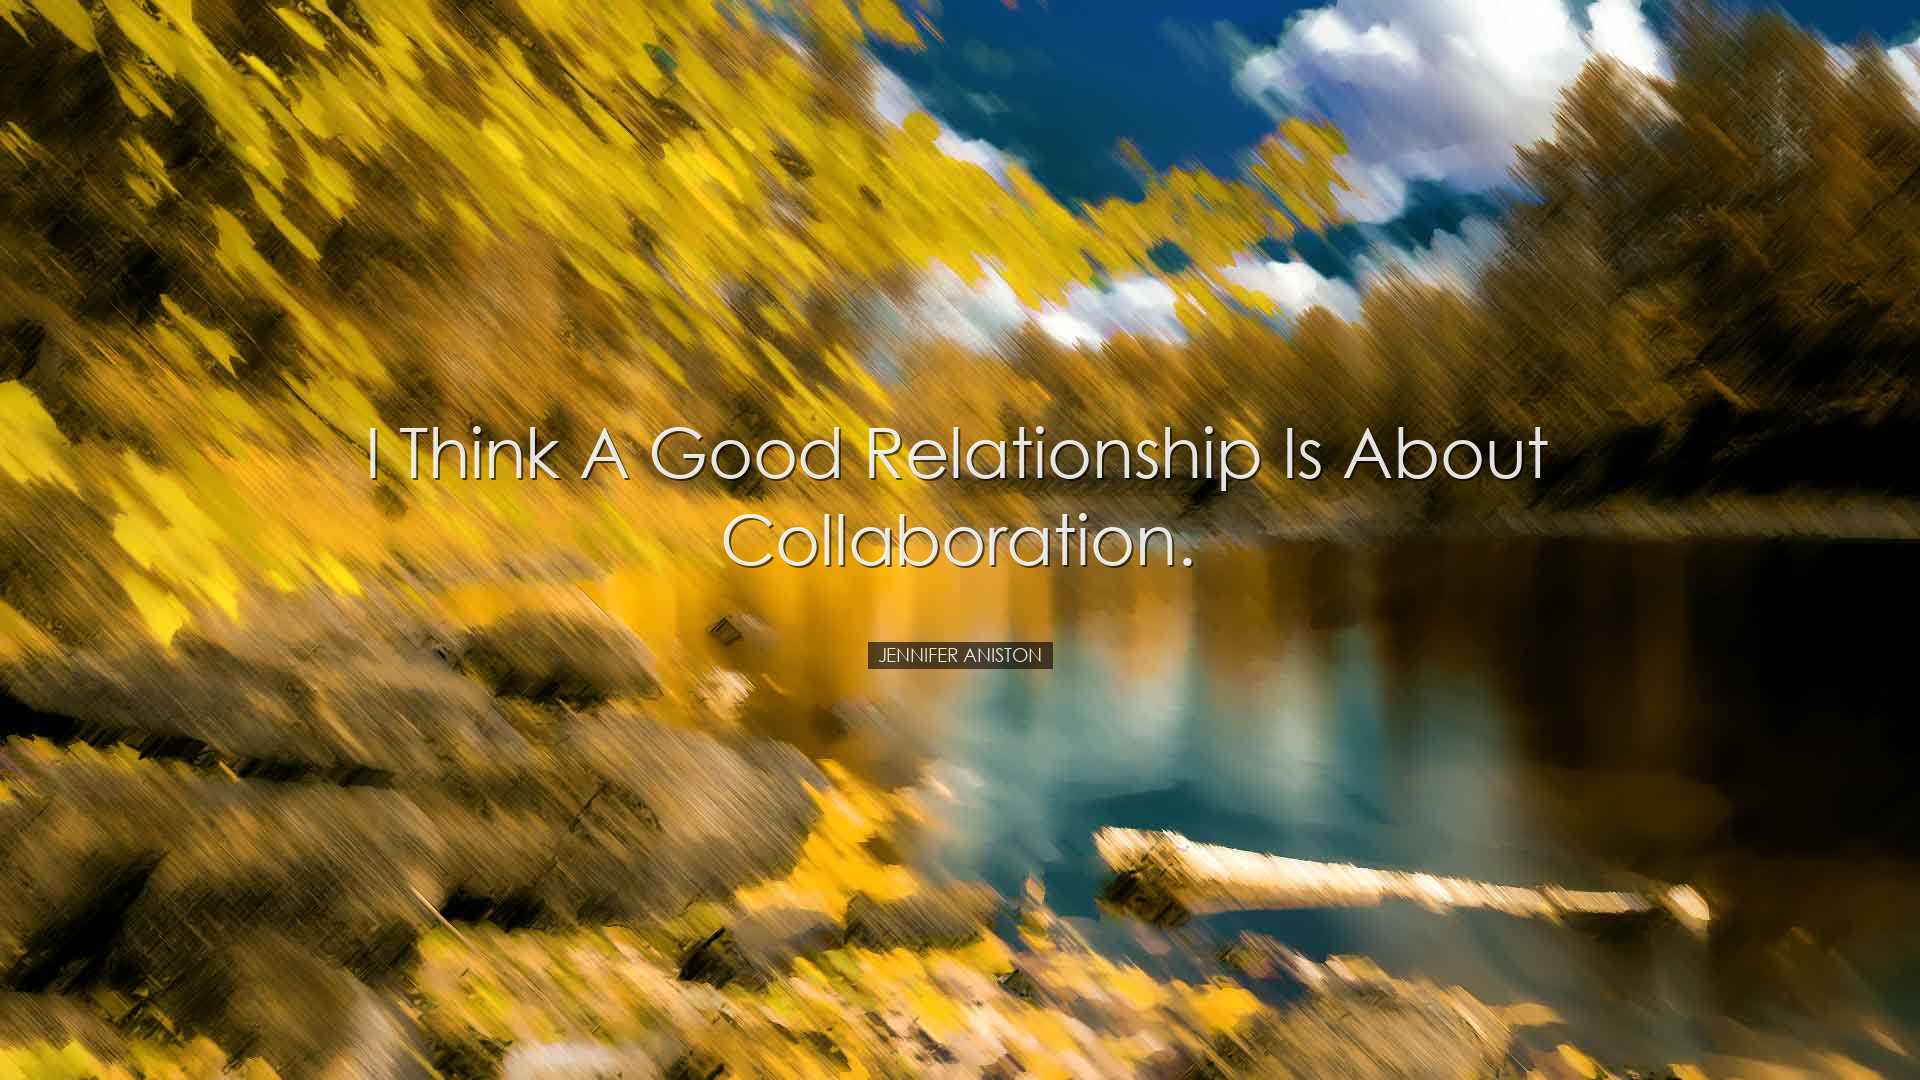 I think a good relationship is about collaboration. - Jennifer Ani